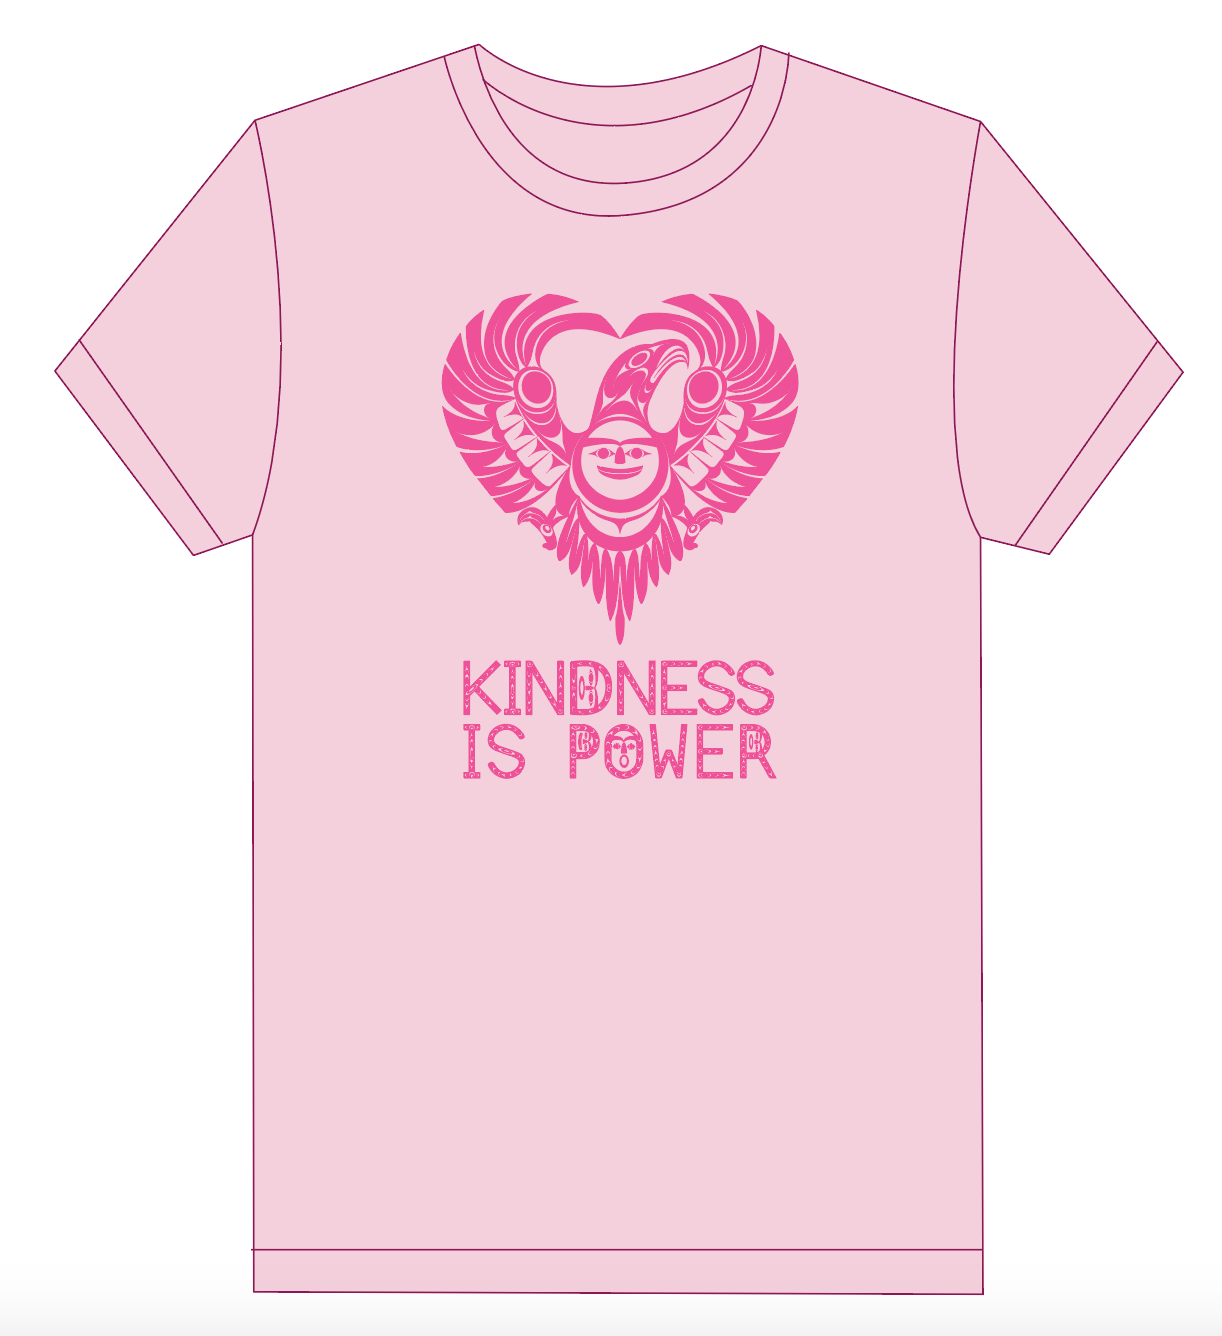 T Shirt Youth Francis Horne Sr. Kindness Is Power - Pink / XL - PINK Y XL PNK - House of Himwitsa Native Art Gallery and Gifts